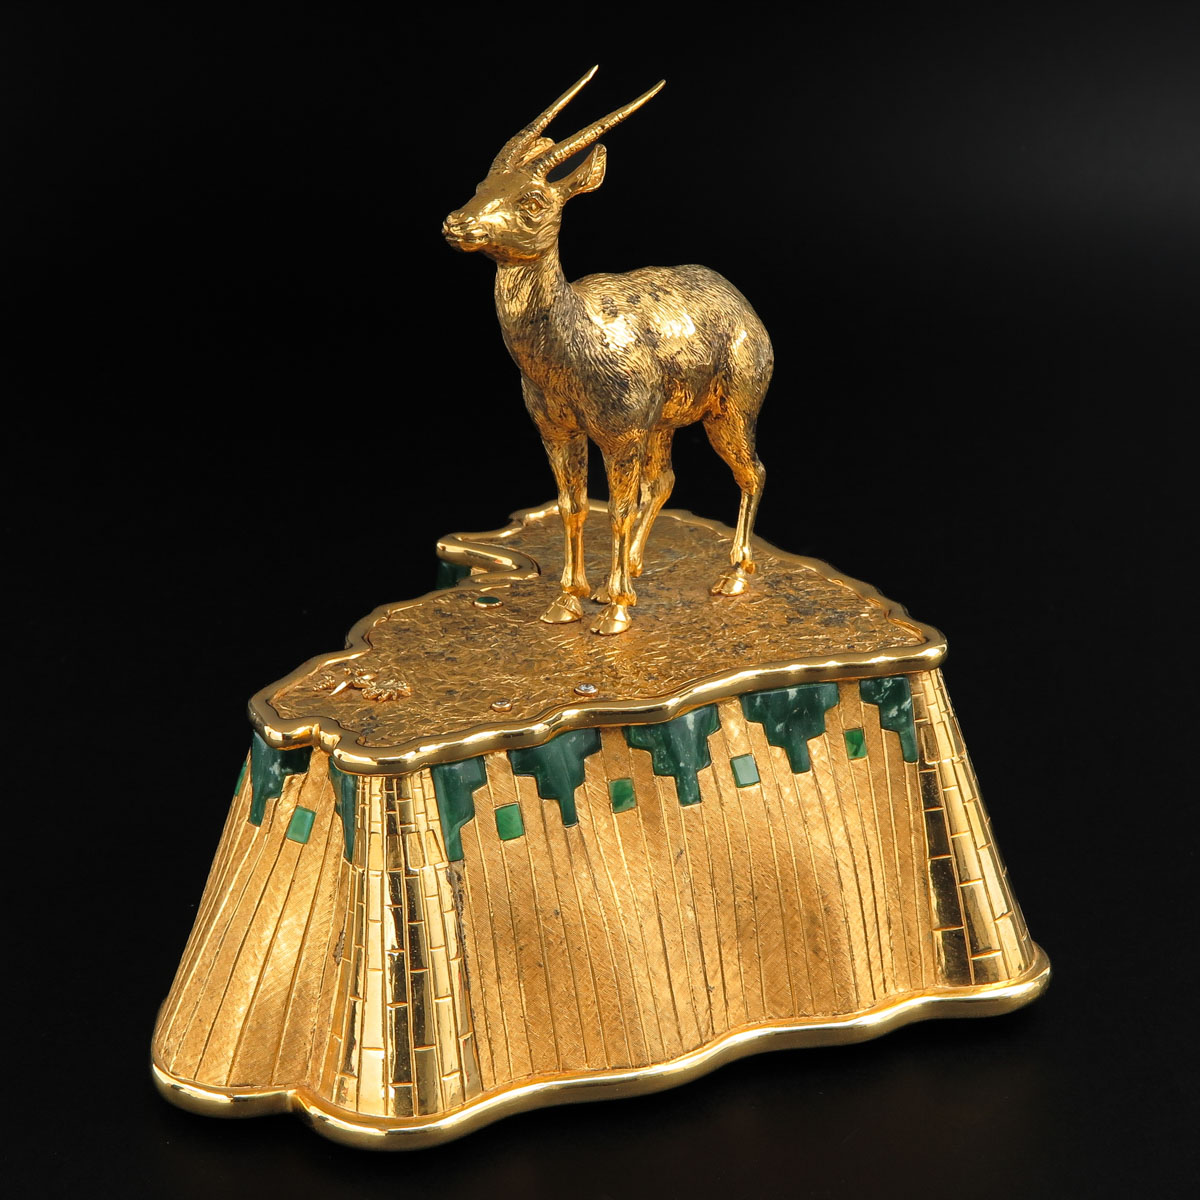 A Mouawad Jewelers Antelope Sculpture Set with Jewels